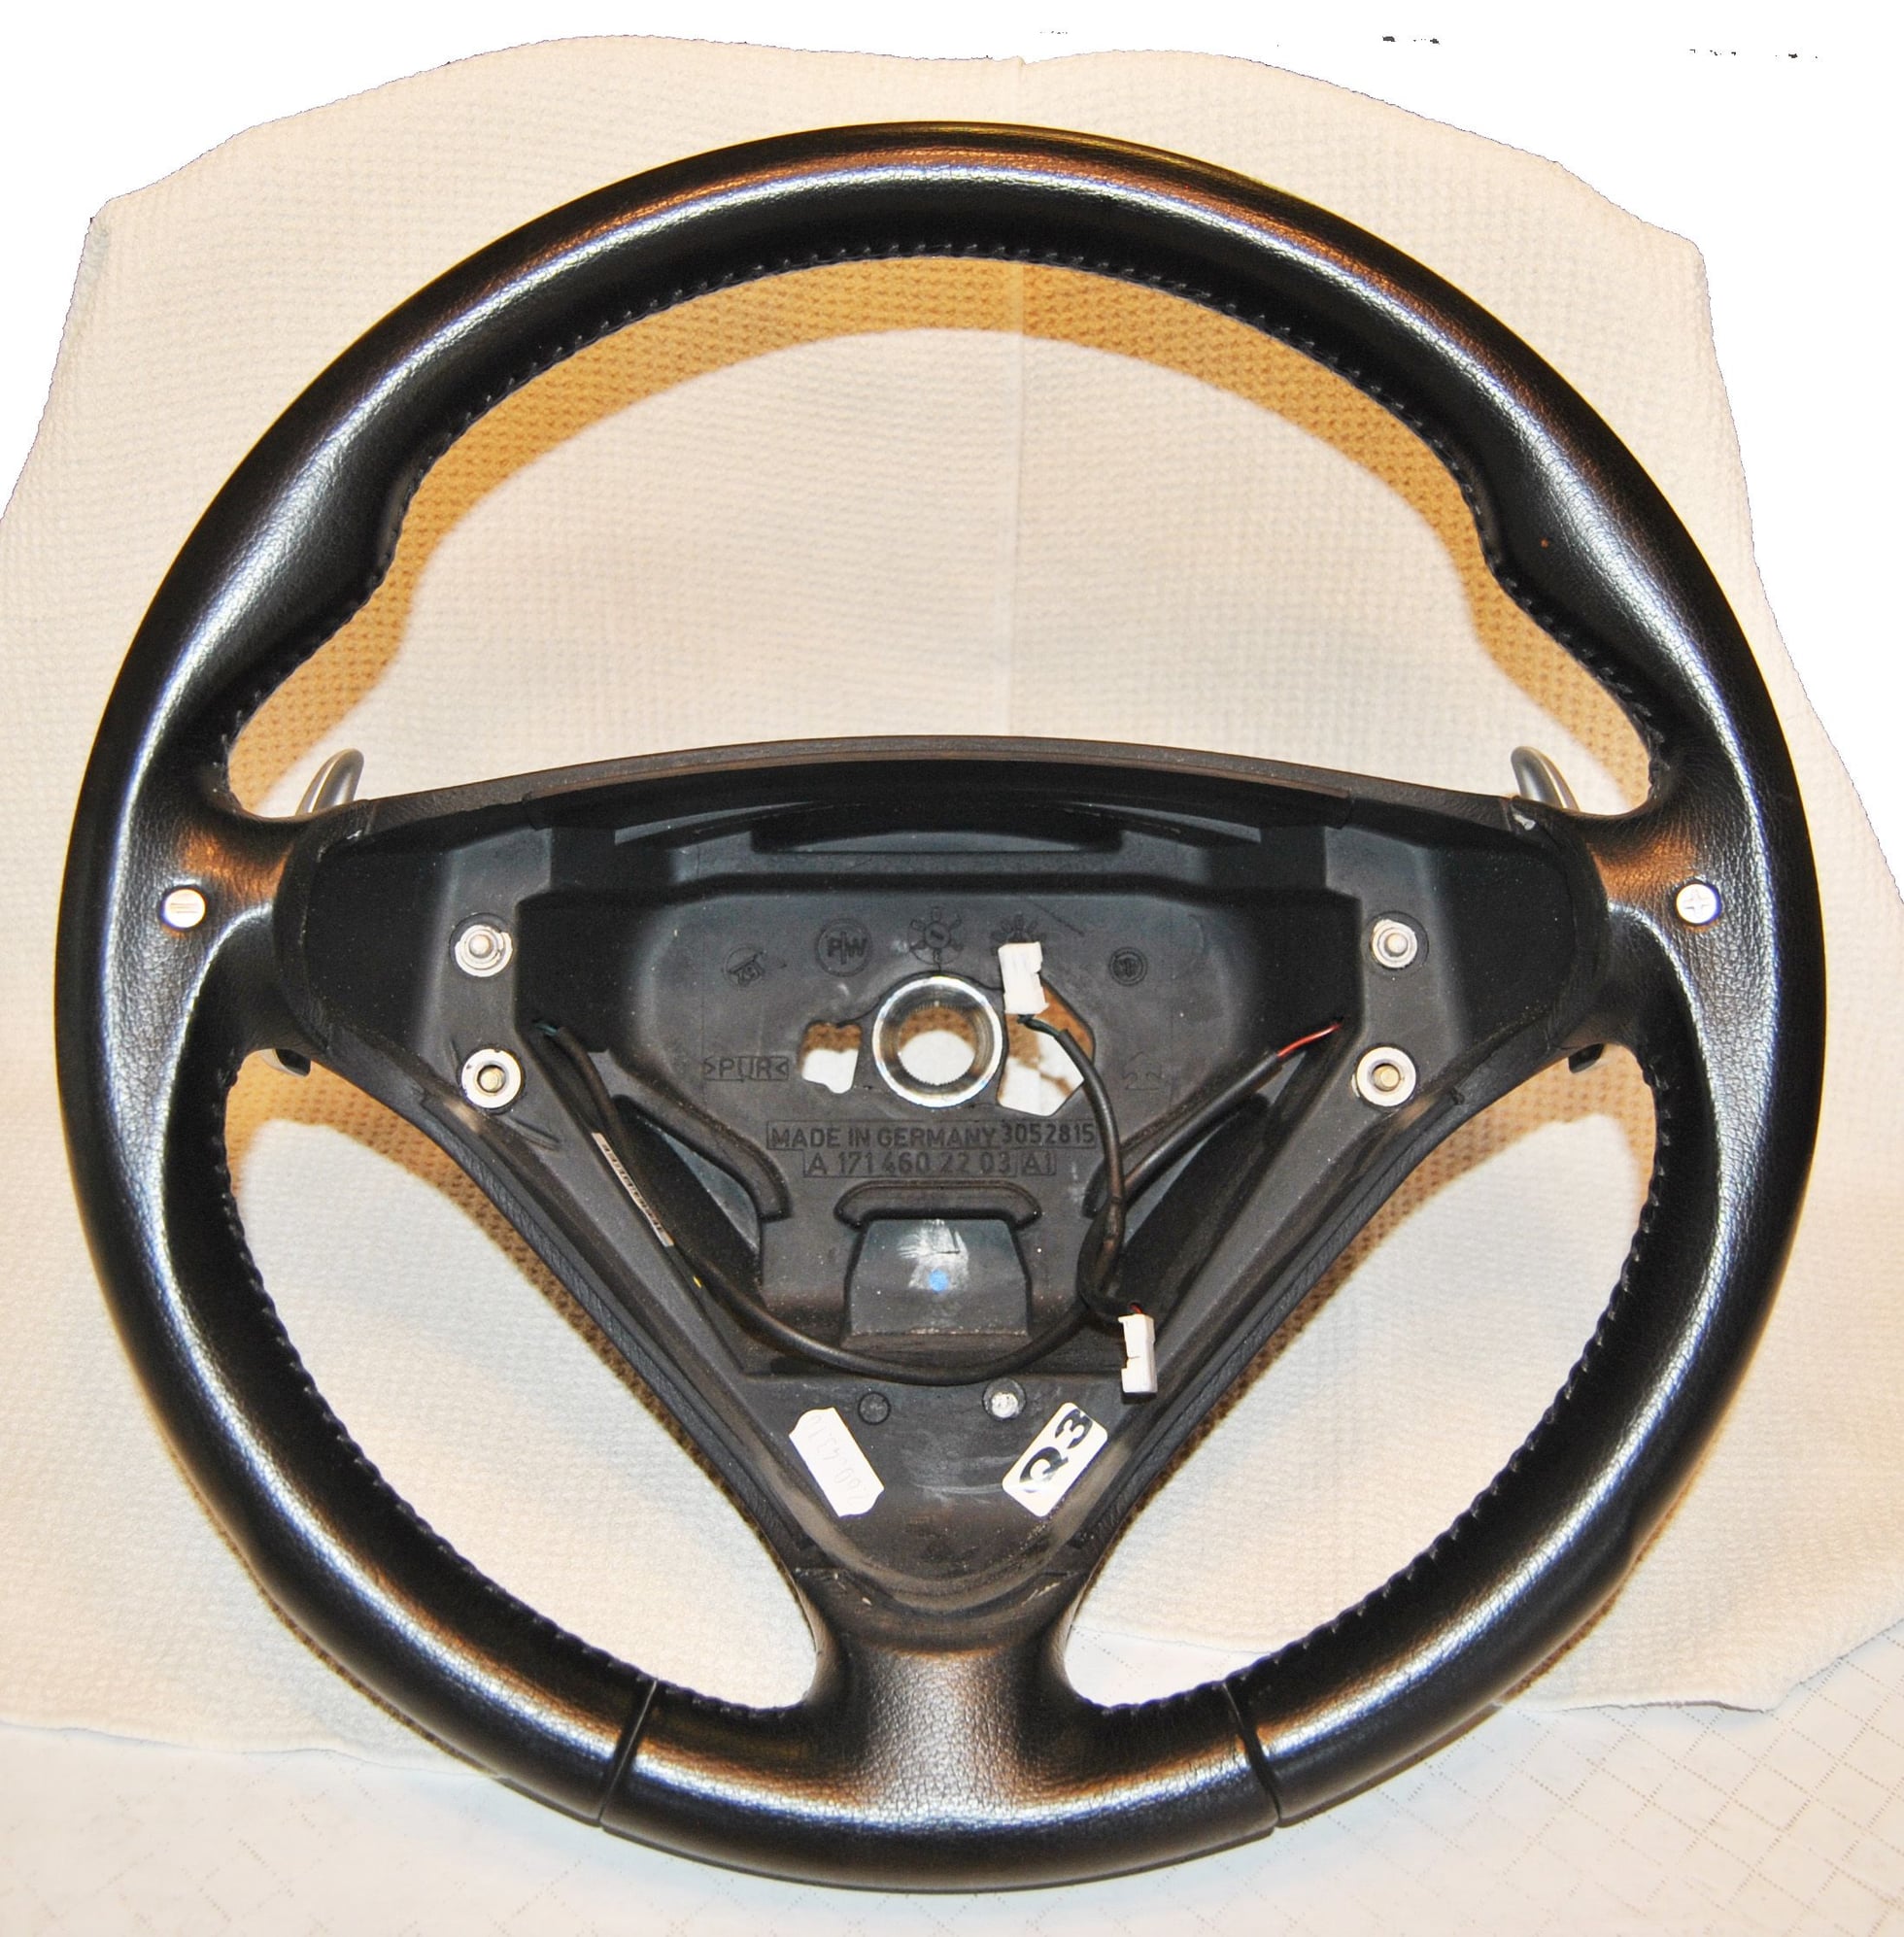 Interior/Upholstery - 2005-2006 Mercedes Benz C55 AMG Steering Wheel - Used - 2005 to 2006 Mercedes-Benz C55 AMG - Upland, CA 91784, United States